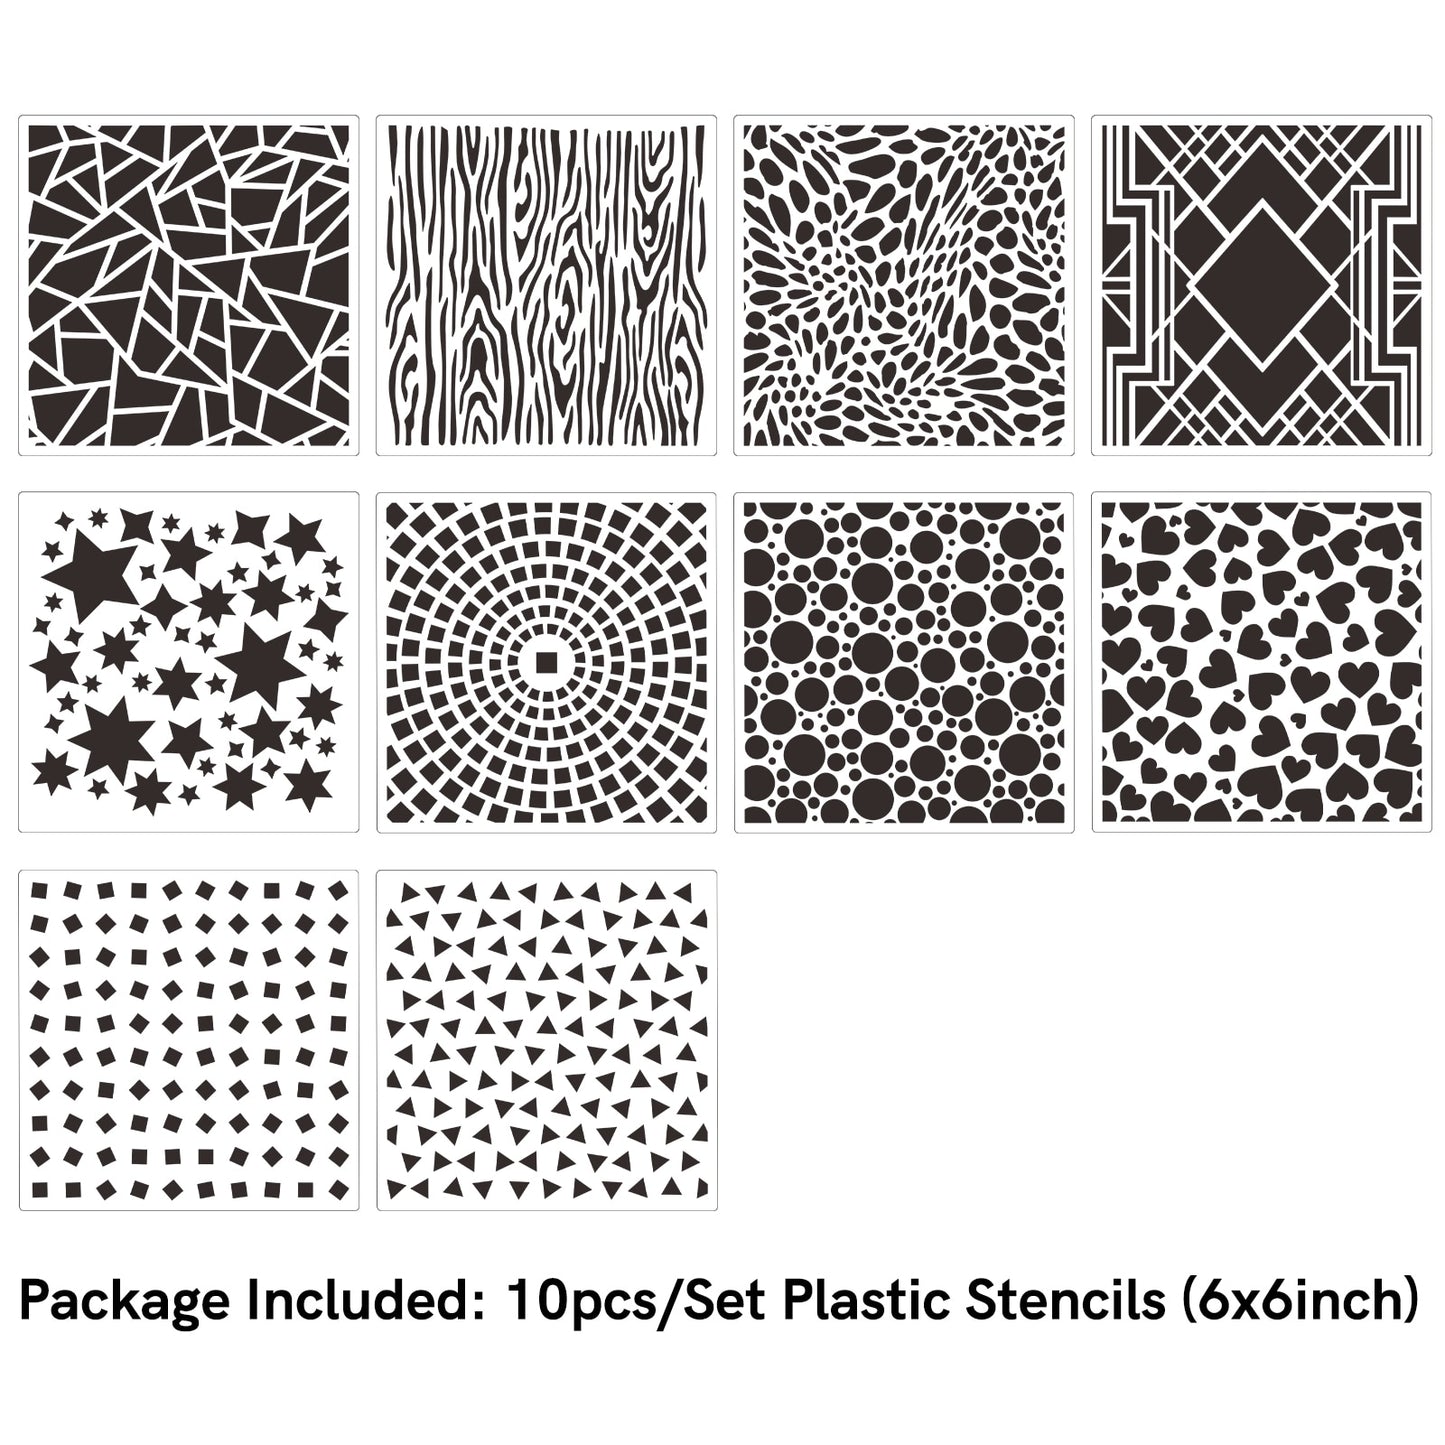 New 6*6 Inch Plastic Stencils for Diy Craft Making, Background for Greeting Cards,  Scrapbooking,